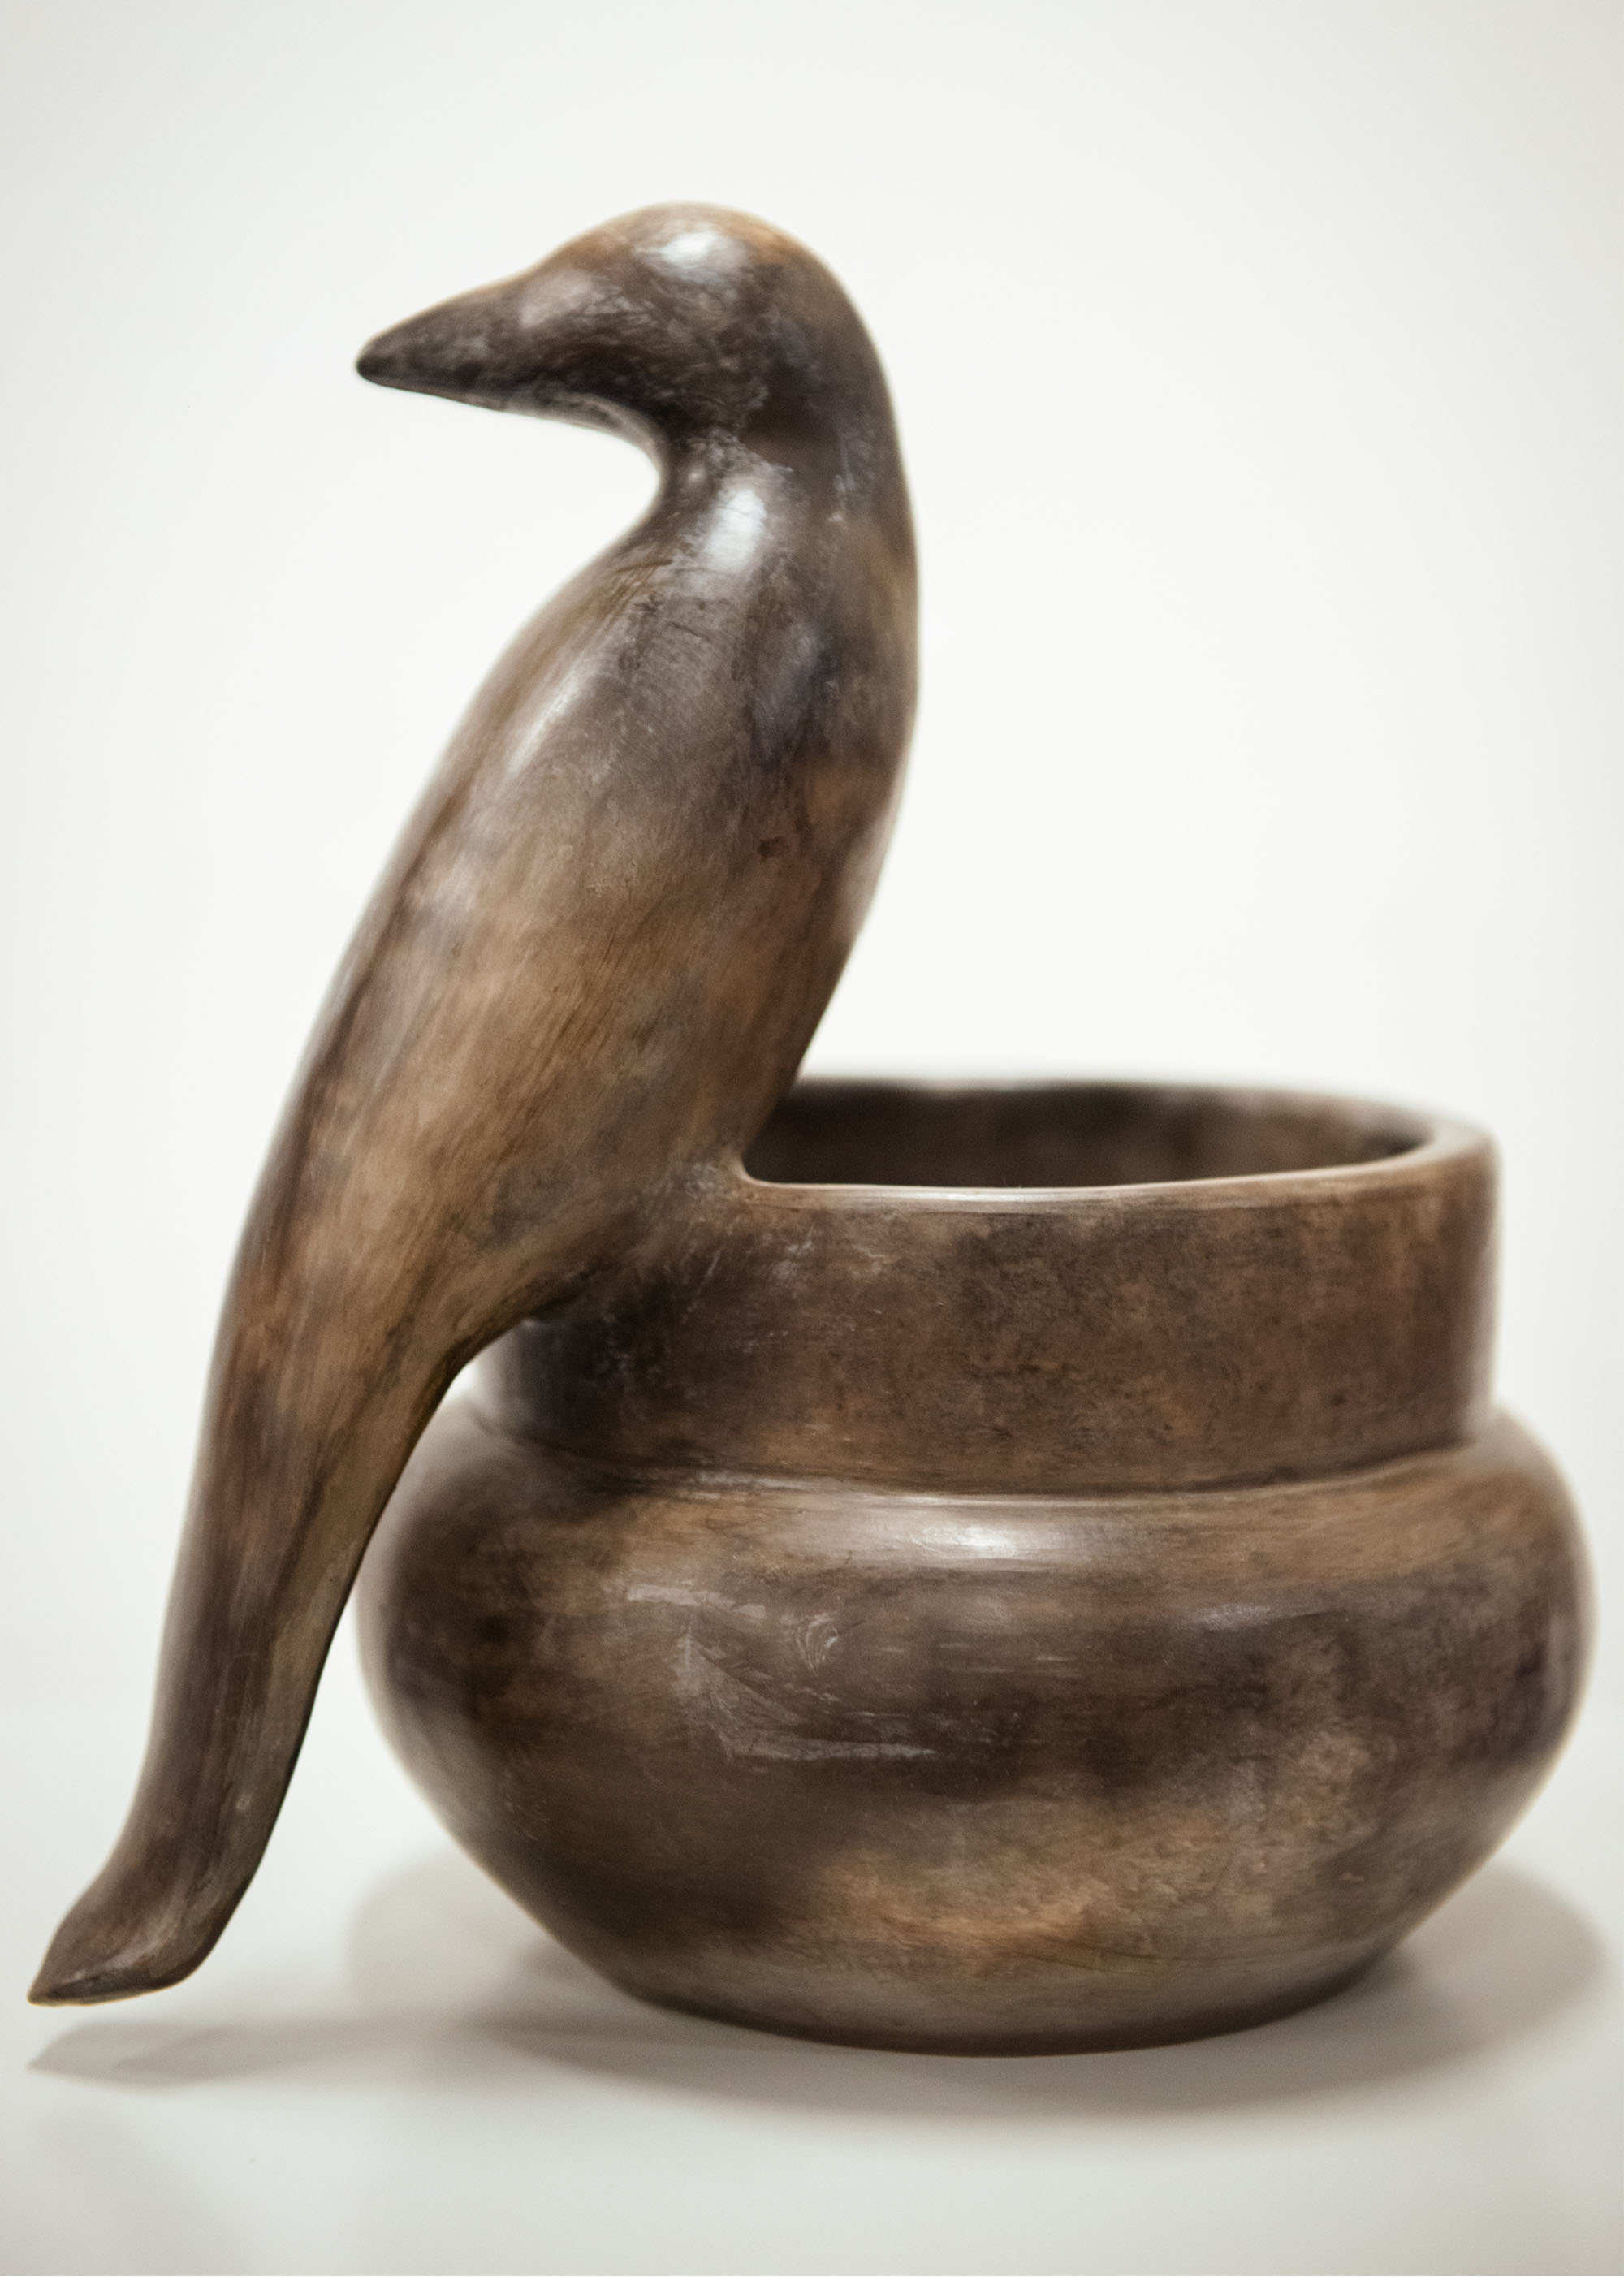 Catawba pottery bowl with a carved bird sitting on the left of the bowl